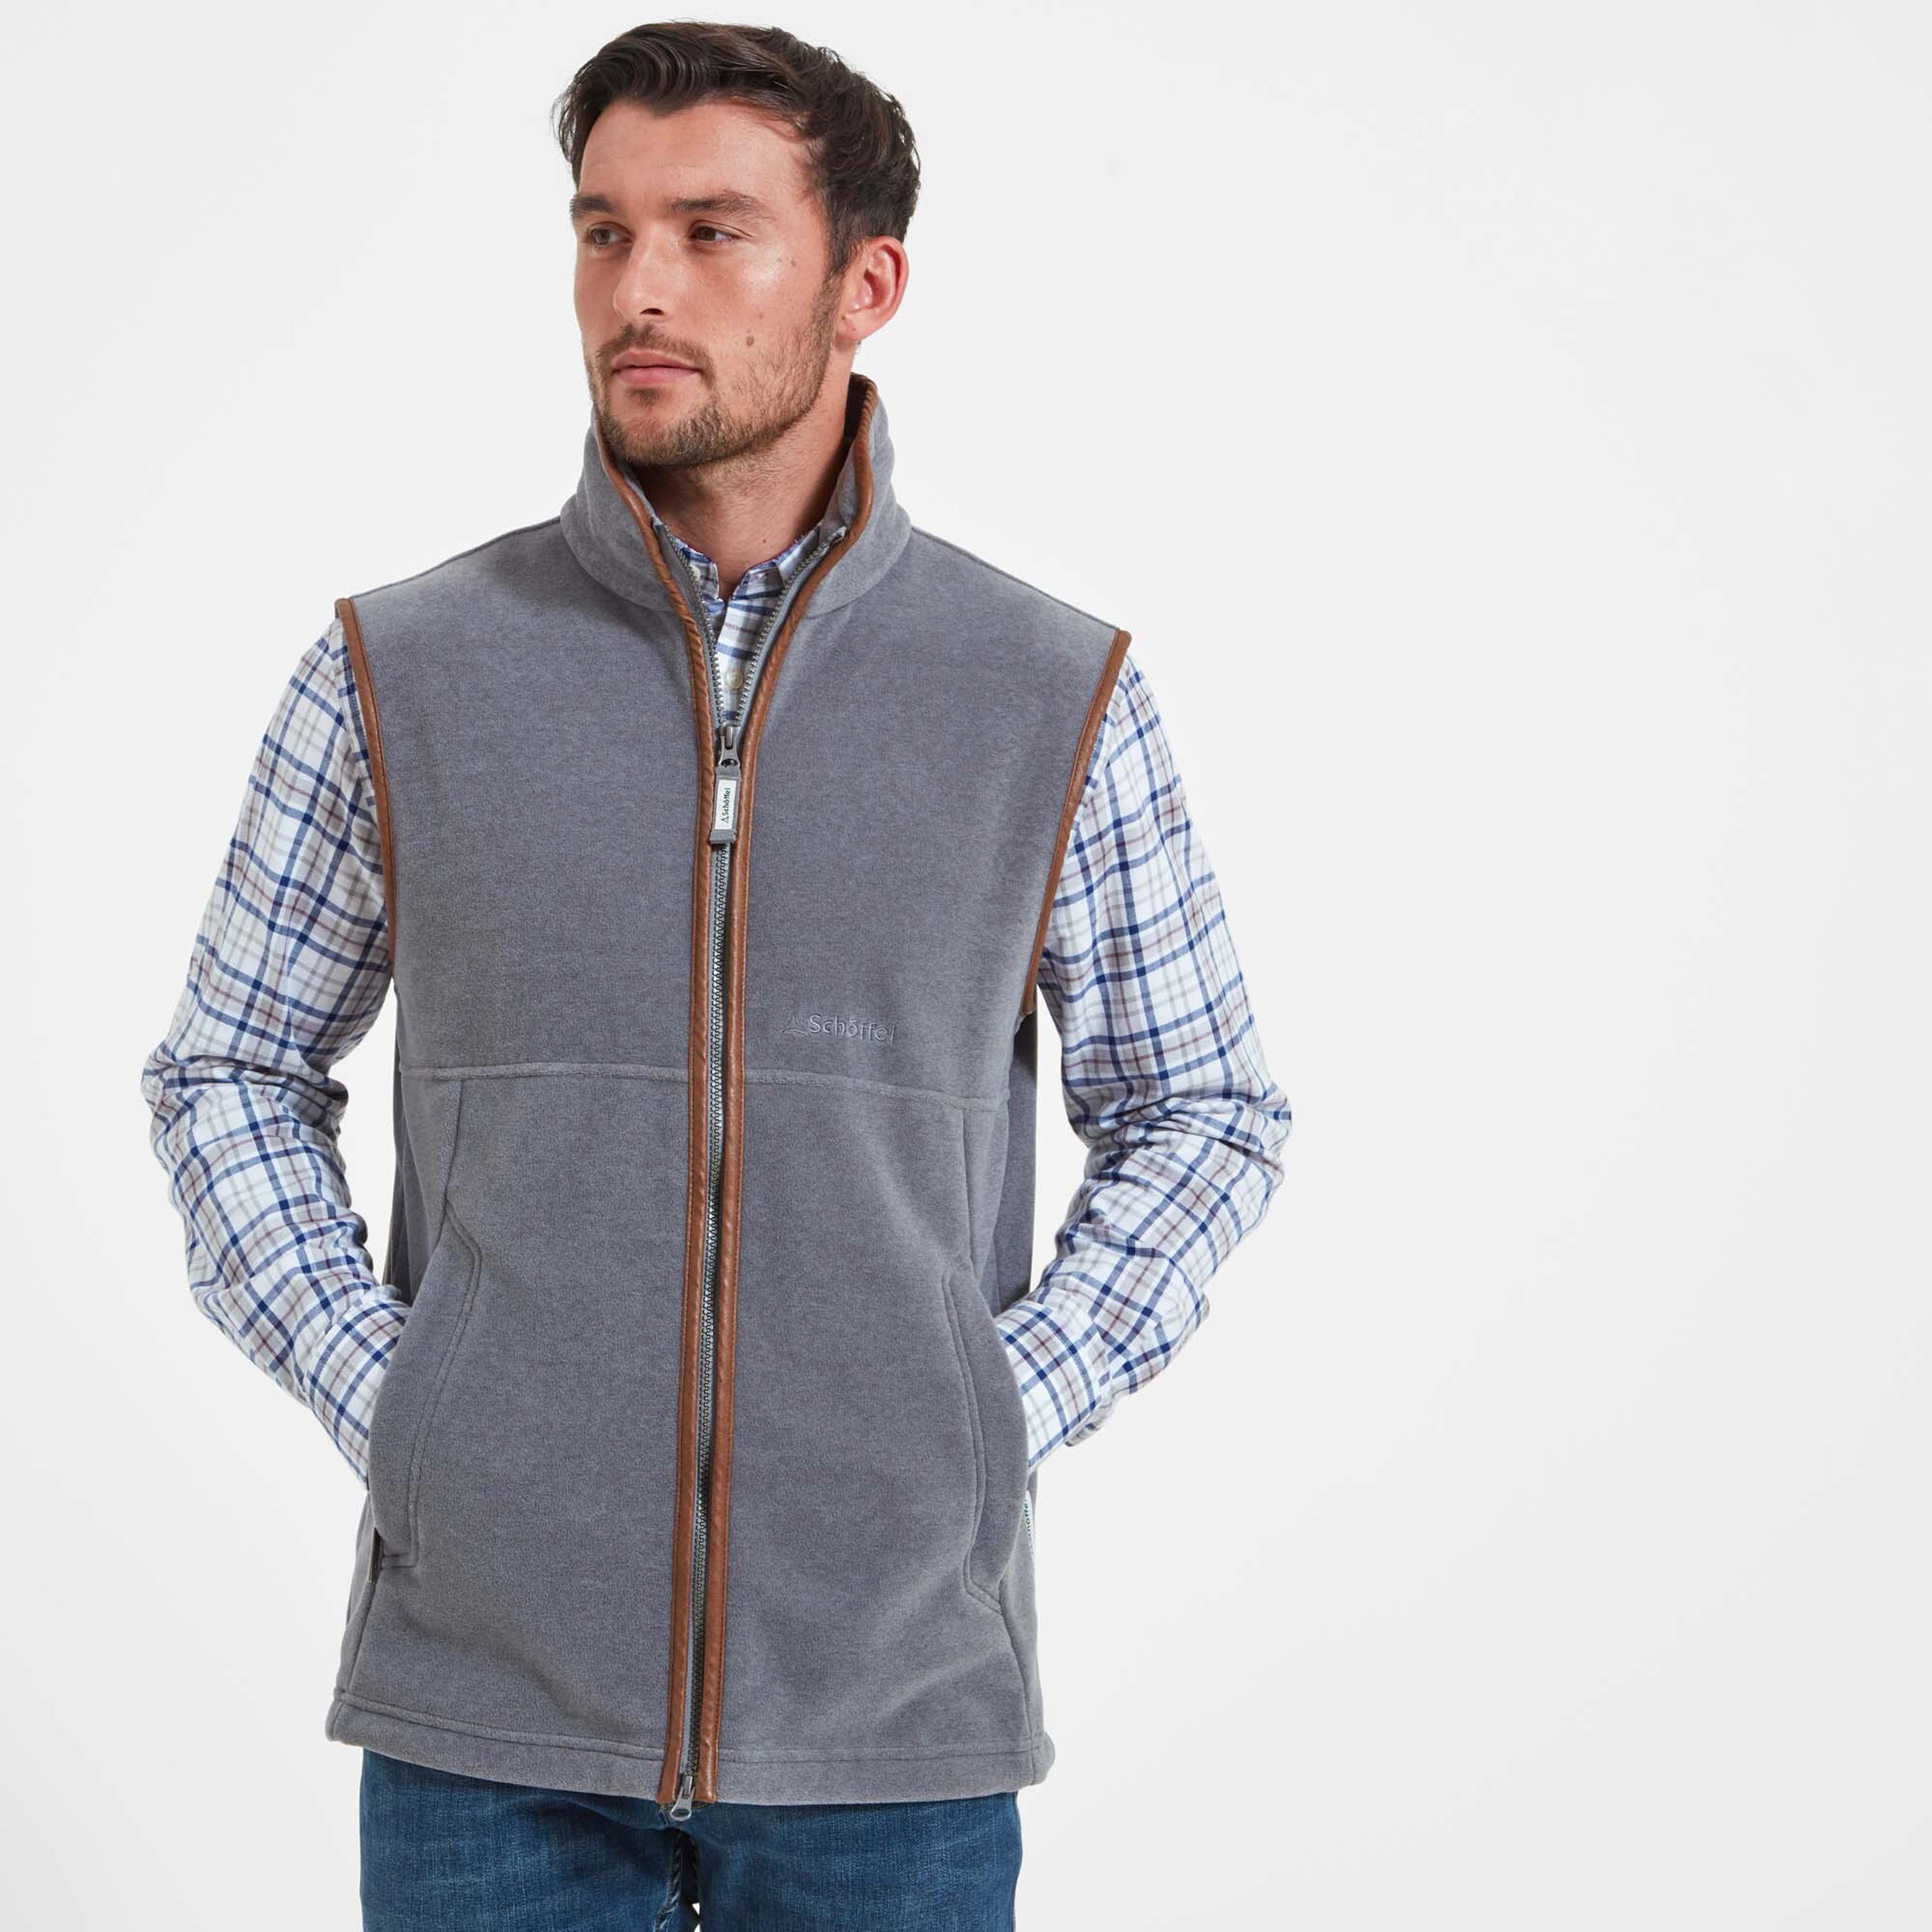 Schoffel Oakham: 5 Universal Styles That Are Always Chic | TechPlanet